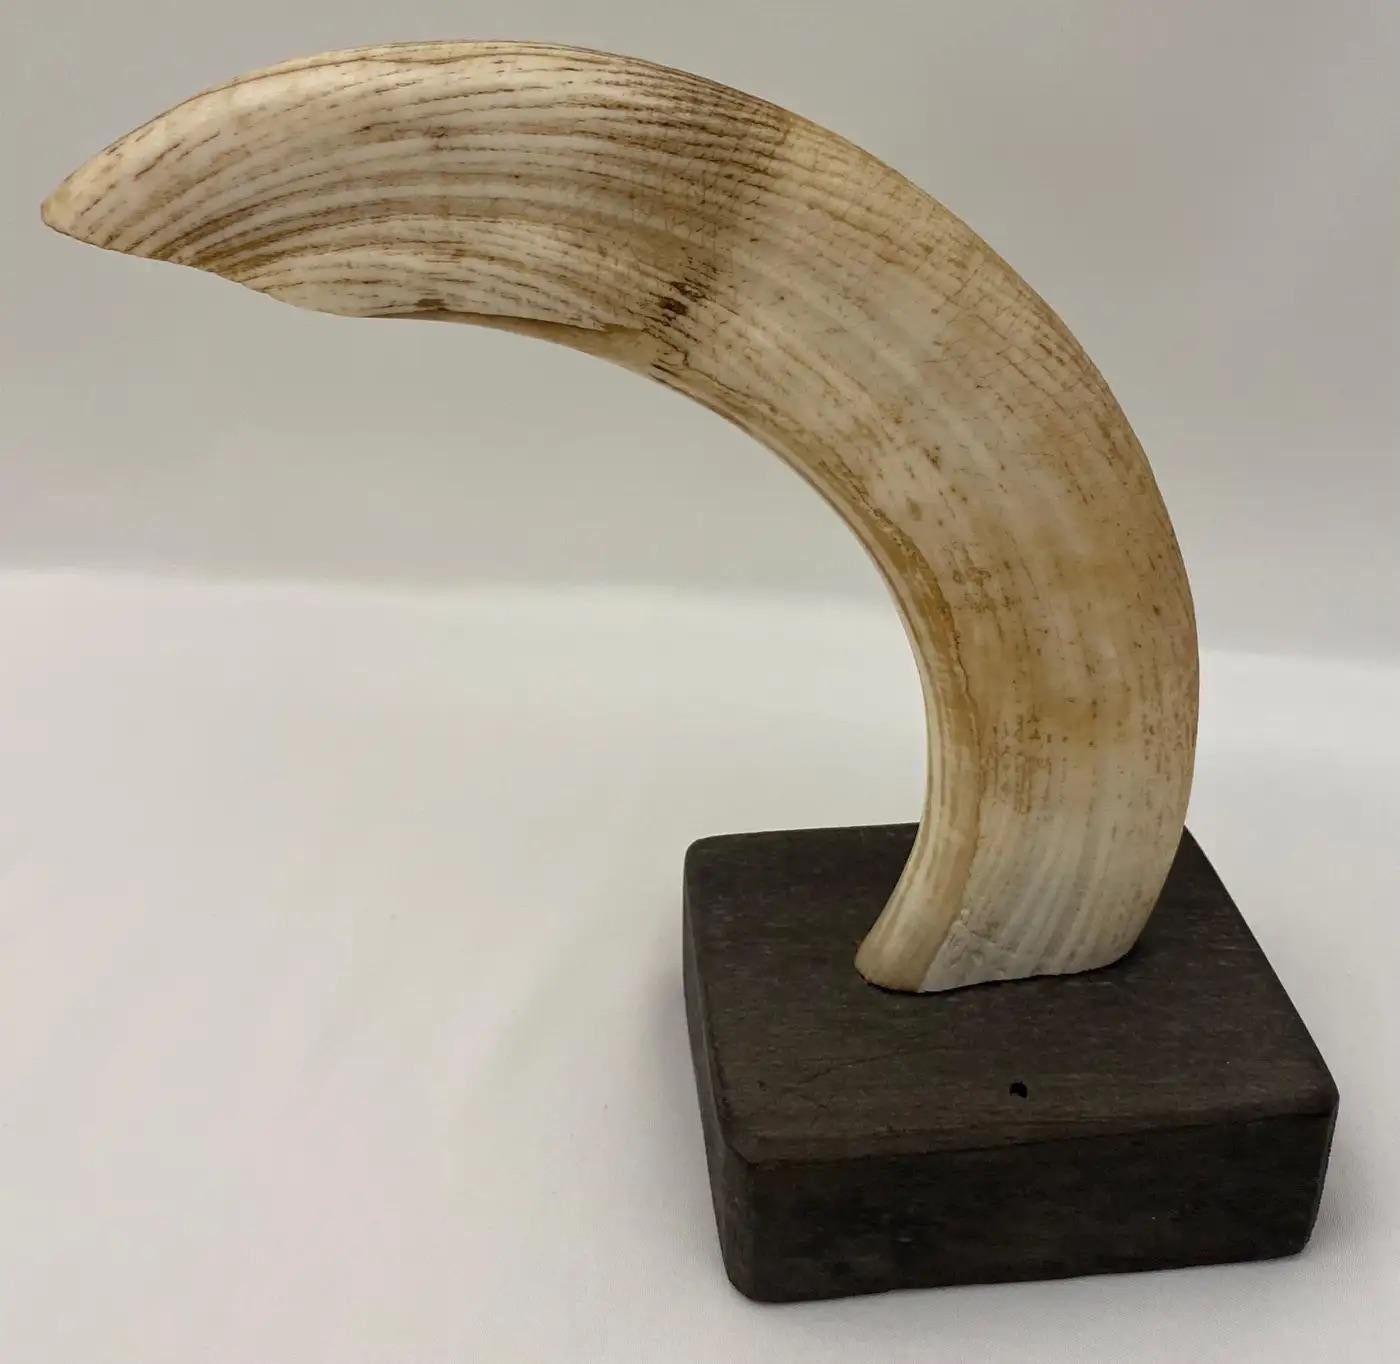 Rare pair of bookends made from natural hippo teeth. 

Perfect to display your favorite books on a nightstand, mantel, dresser or shelf. Certainly a topic of conversation. 

The antique set of books shown in the photographs are not included in the